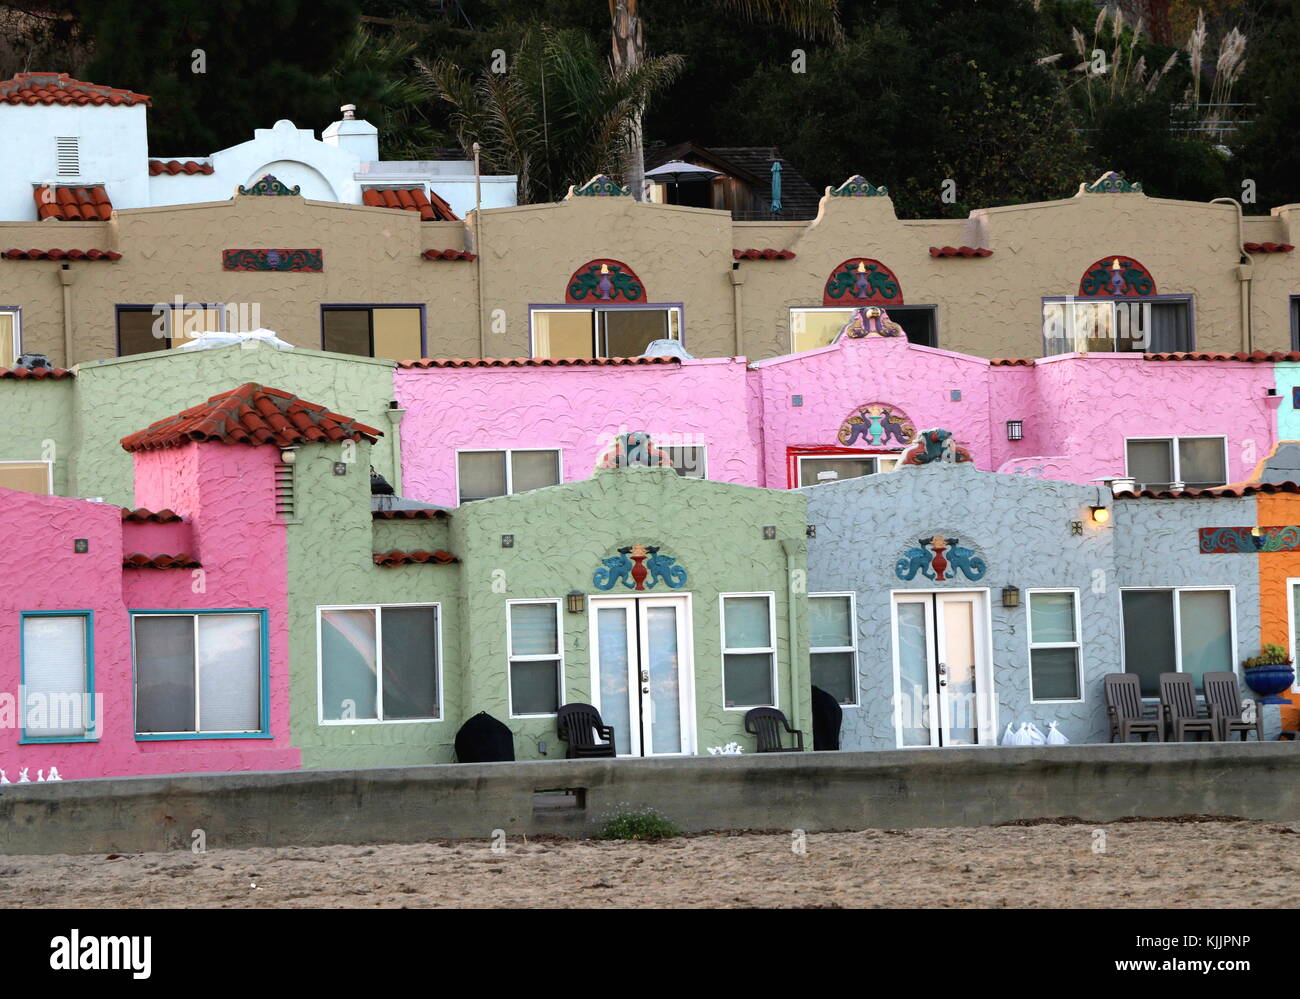 Brightly colored beach cottages, Capitola, CA. Stock Photo